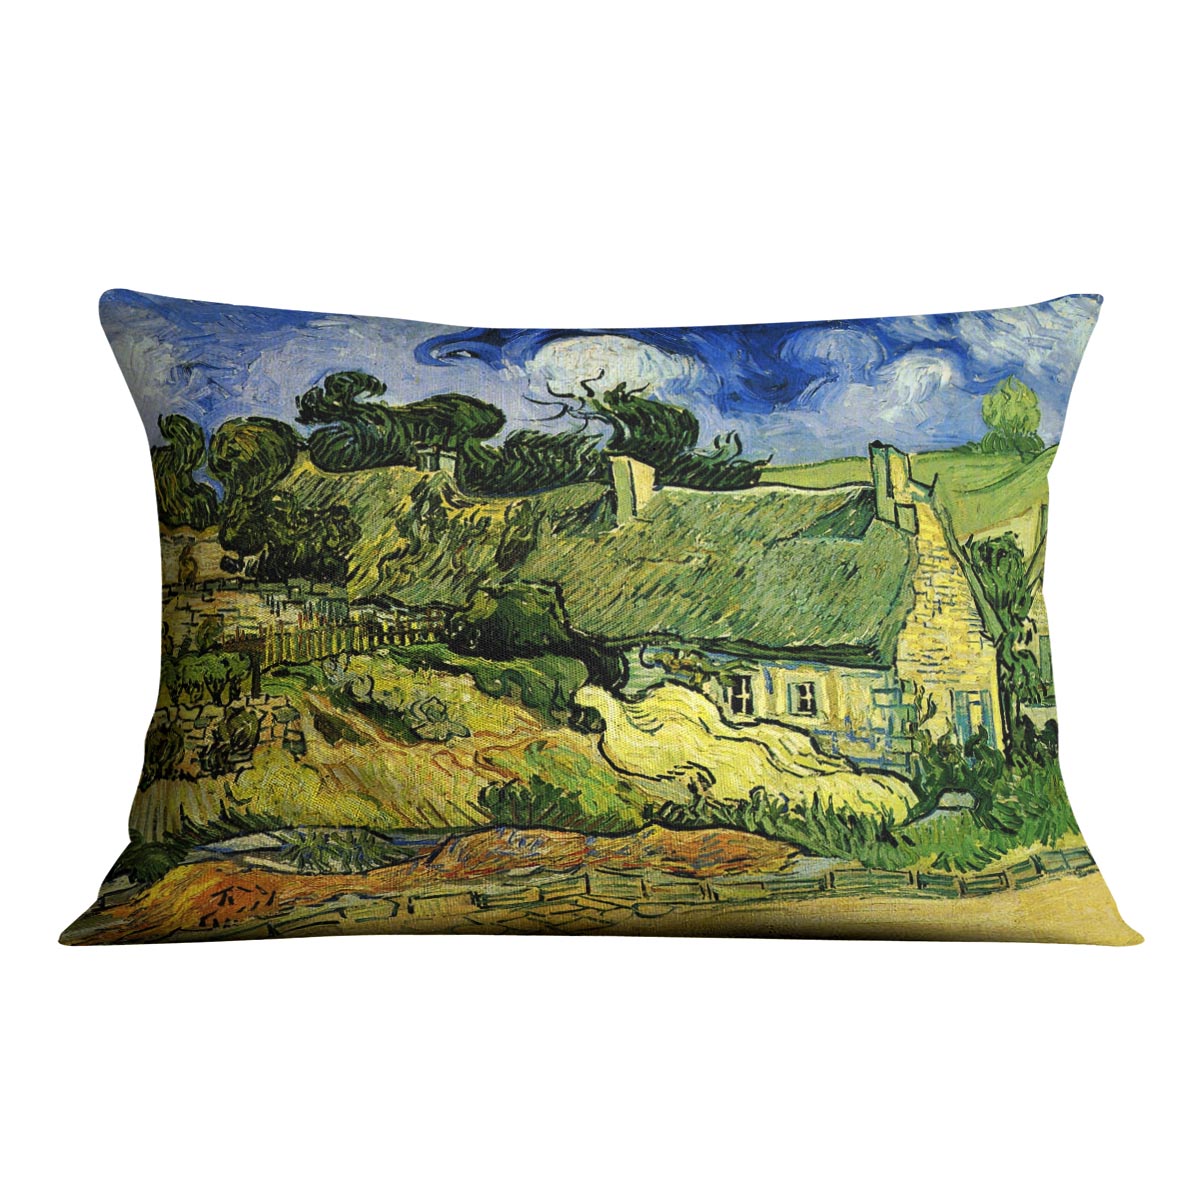 Thatched Cottages at Cordeville by Van Gogh Cushion